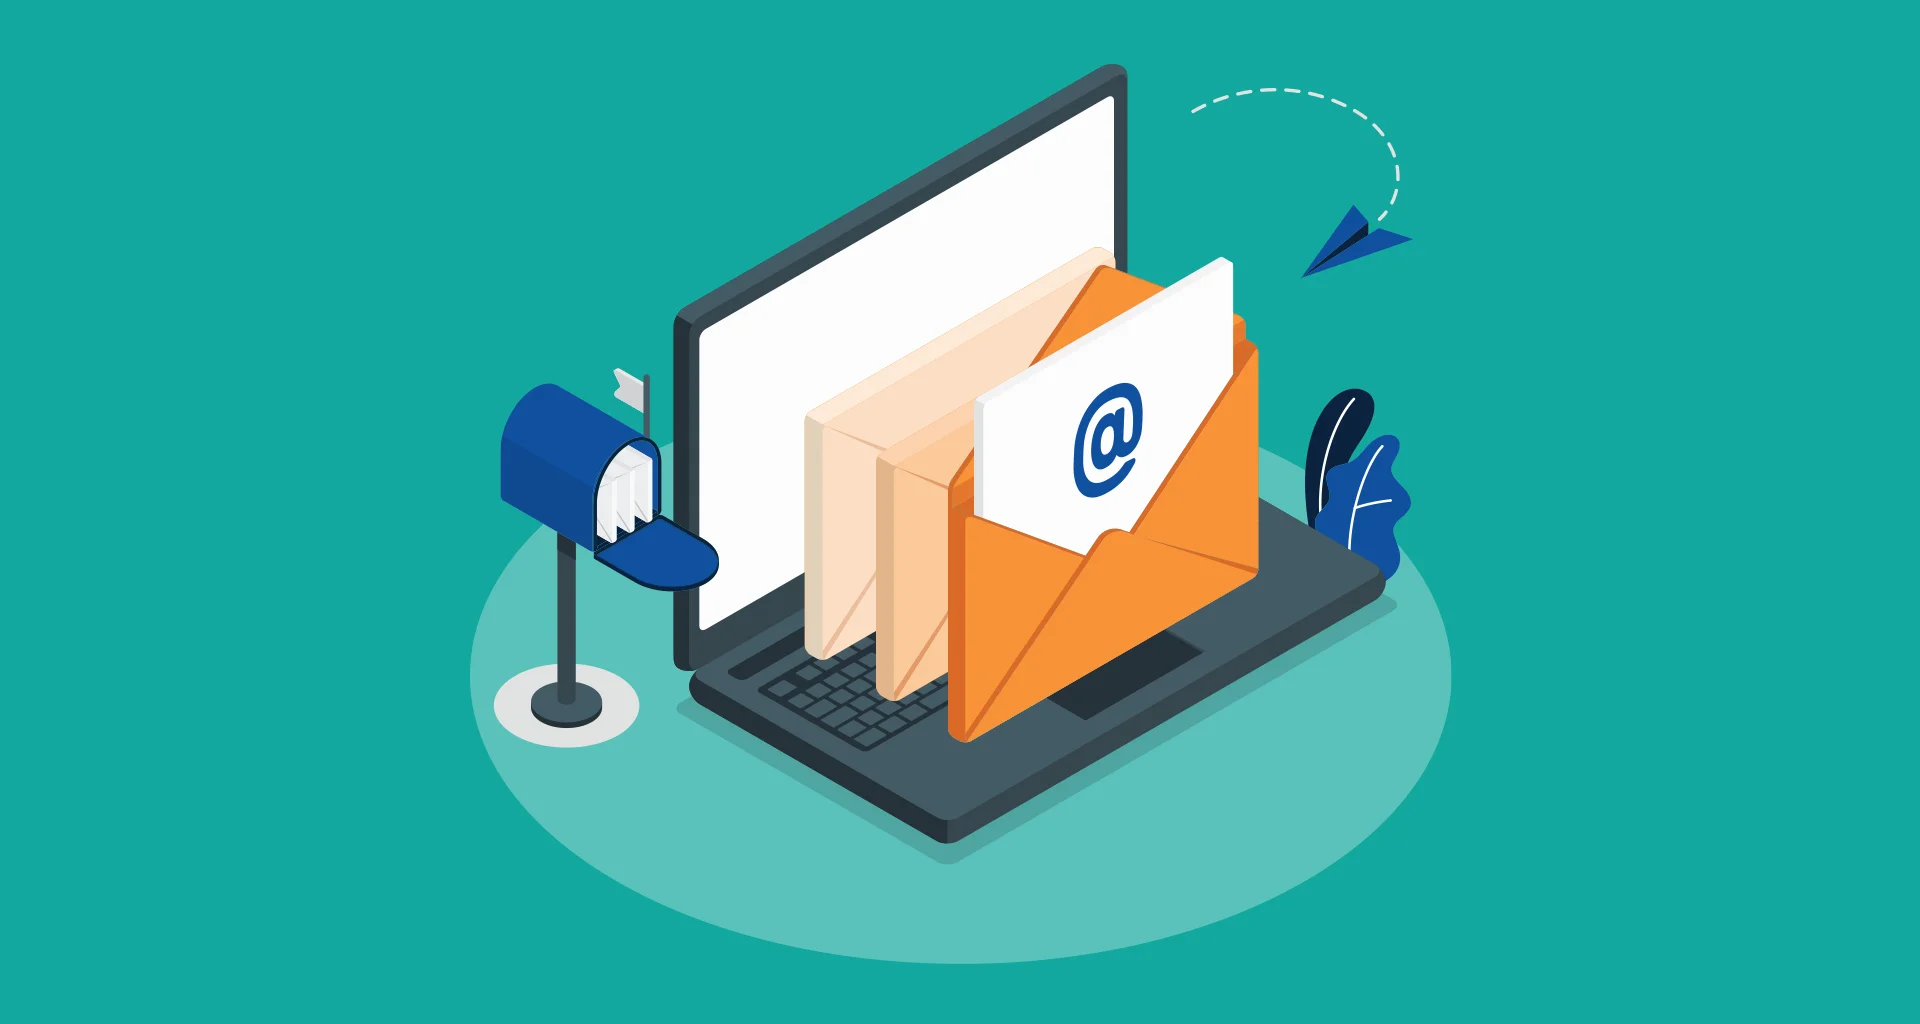 How to select the best email marketing platform for your business